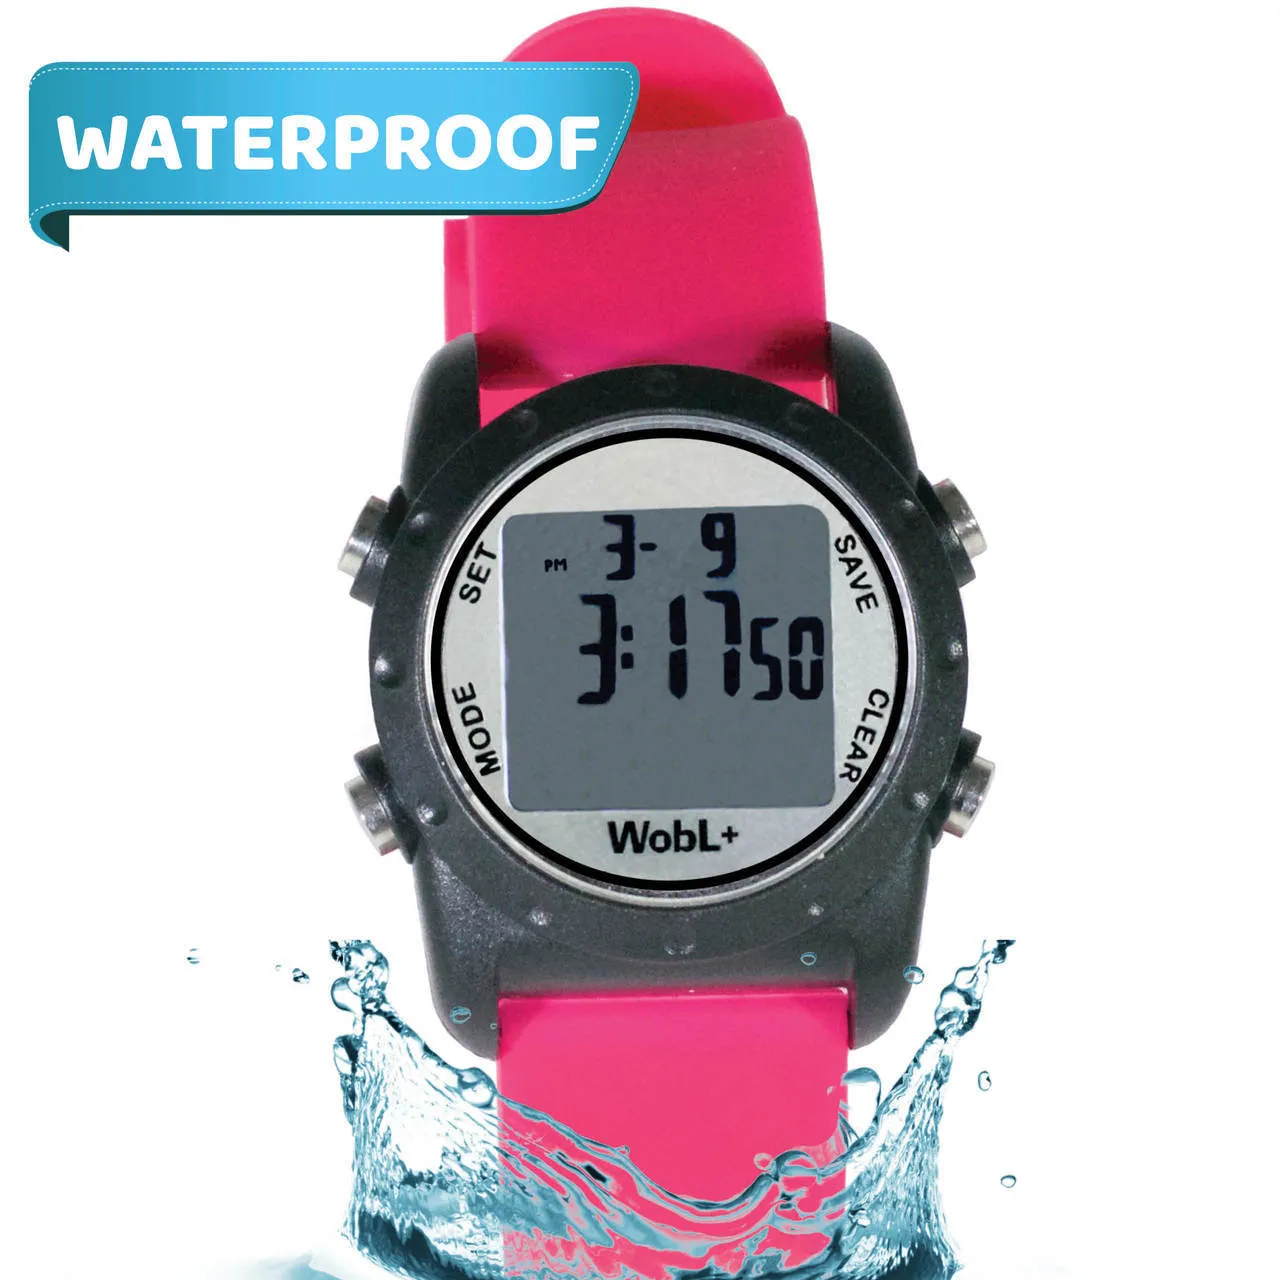 Wobl Watch - From: WOBL+BK To: WOBL+PK  Wobl+ Waterproof Vibrating Watch